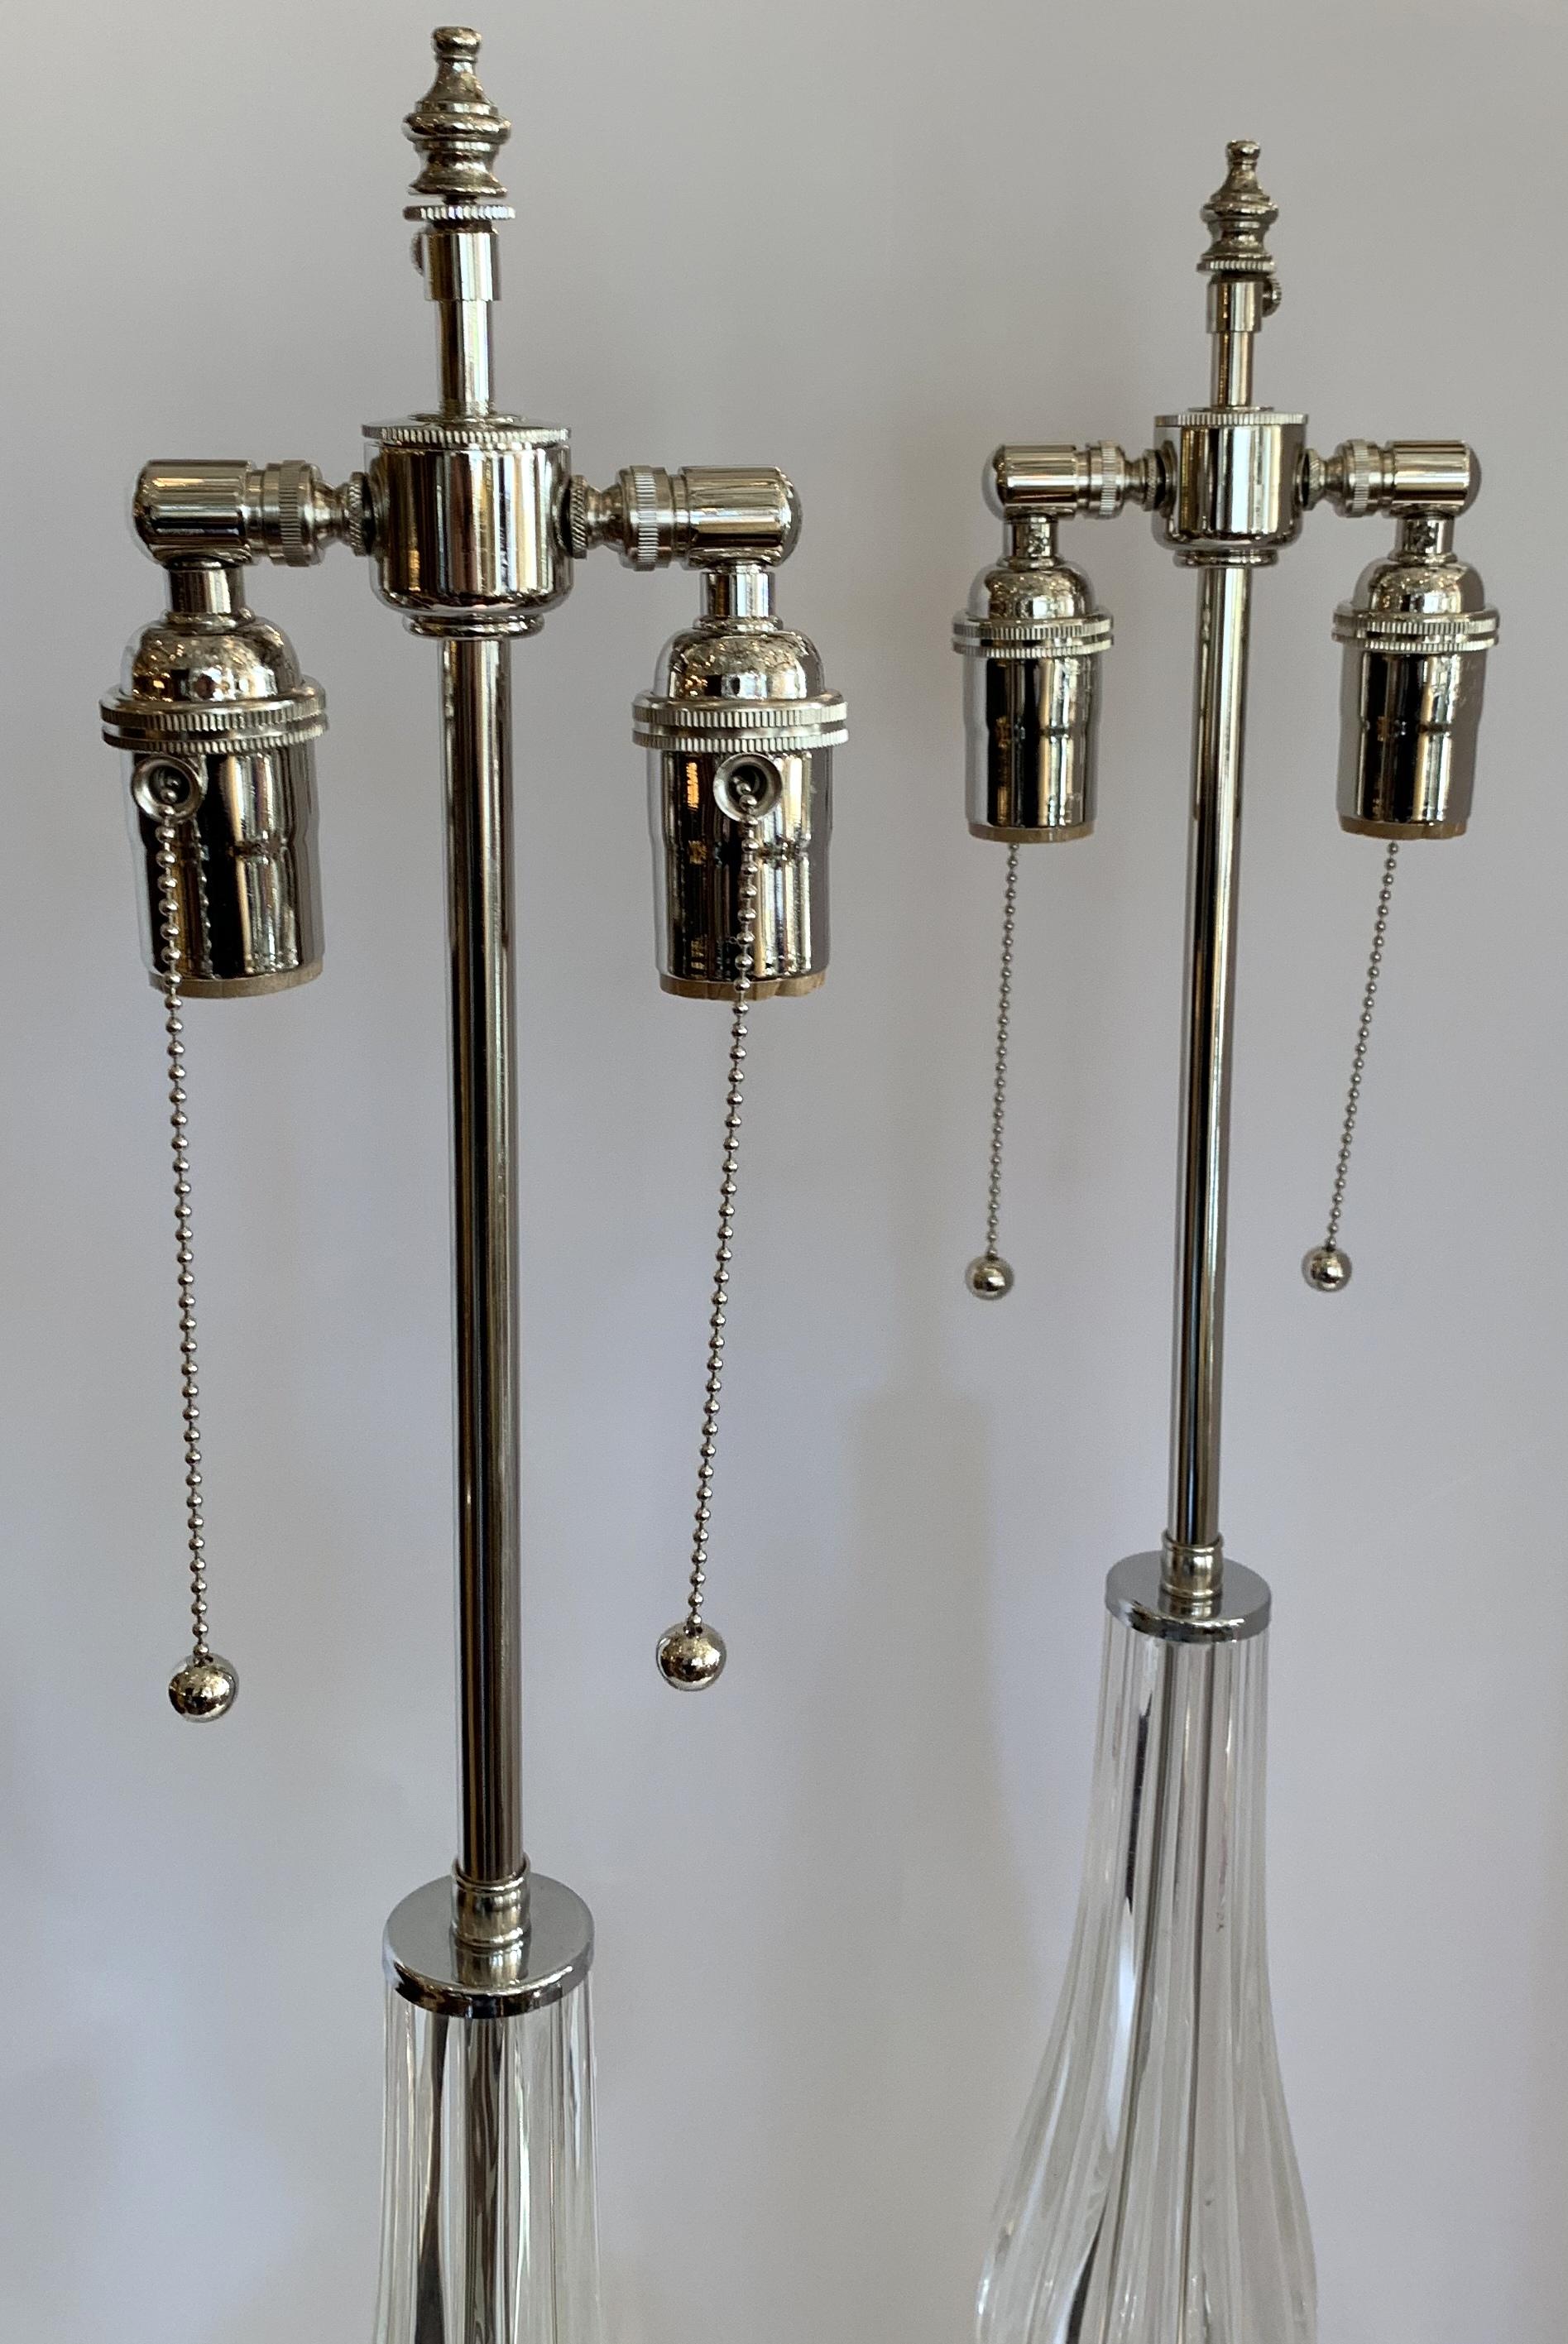 A wonderful pair of Mid-Century Modern Italian Murano Seguso style Venetian clear fluted glass lamps in the Art Deco style with new polished nickel fittings and wiring.
Purchased from Lorin Marsh.